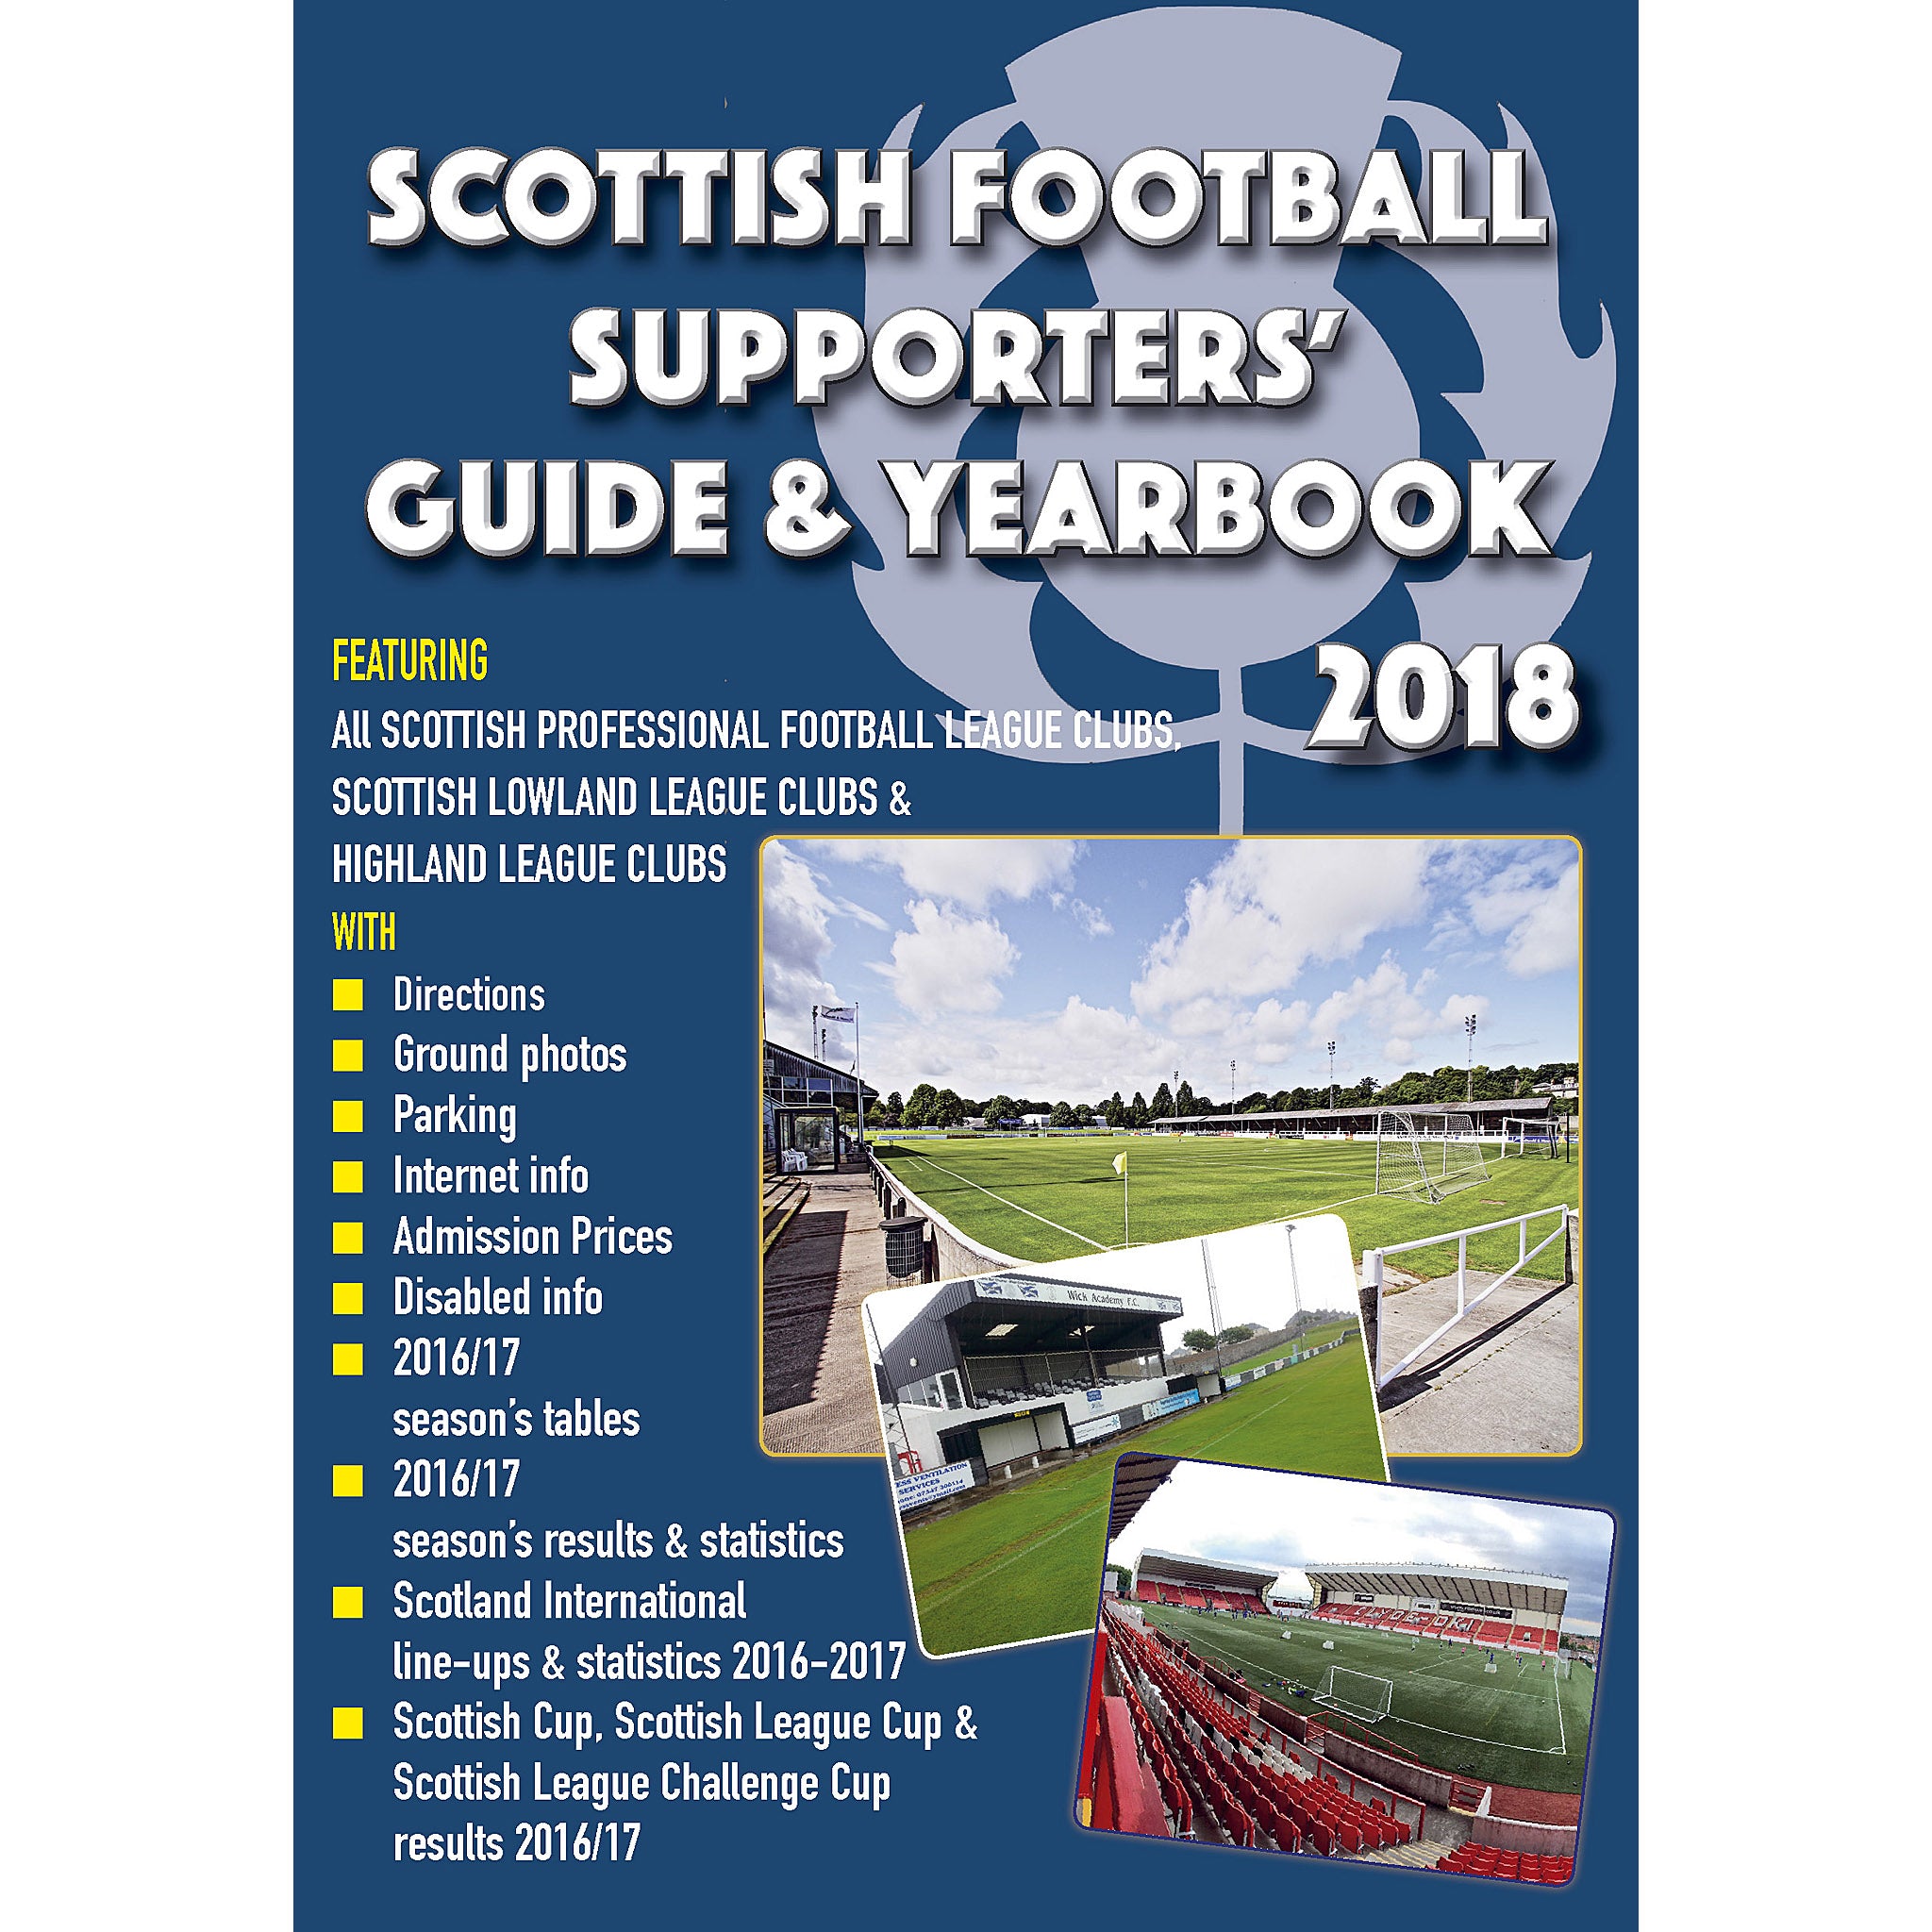 Scottish Football Supporters' Guide & Yearbook 2018